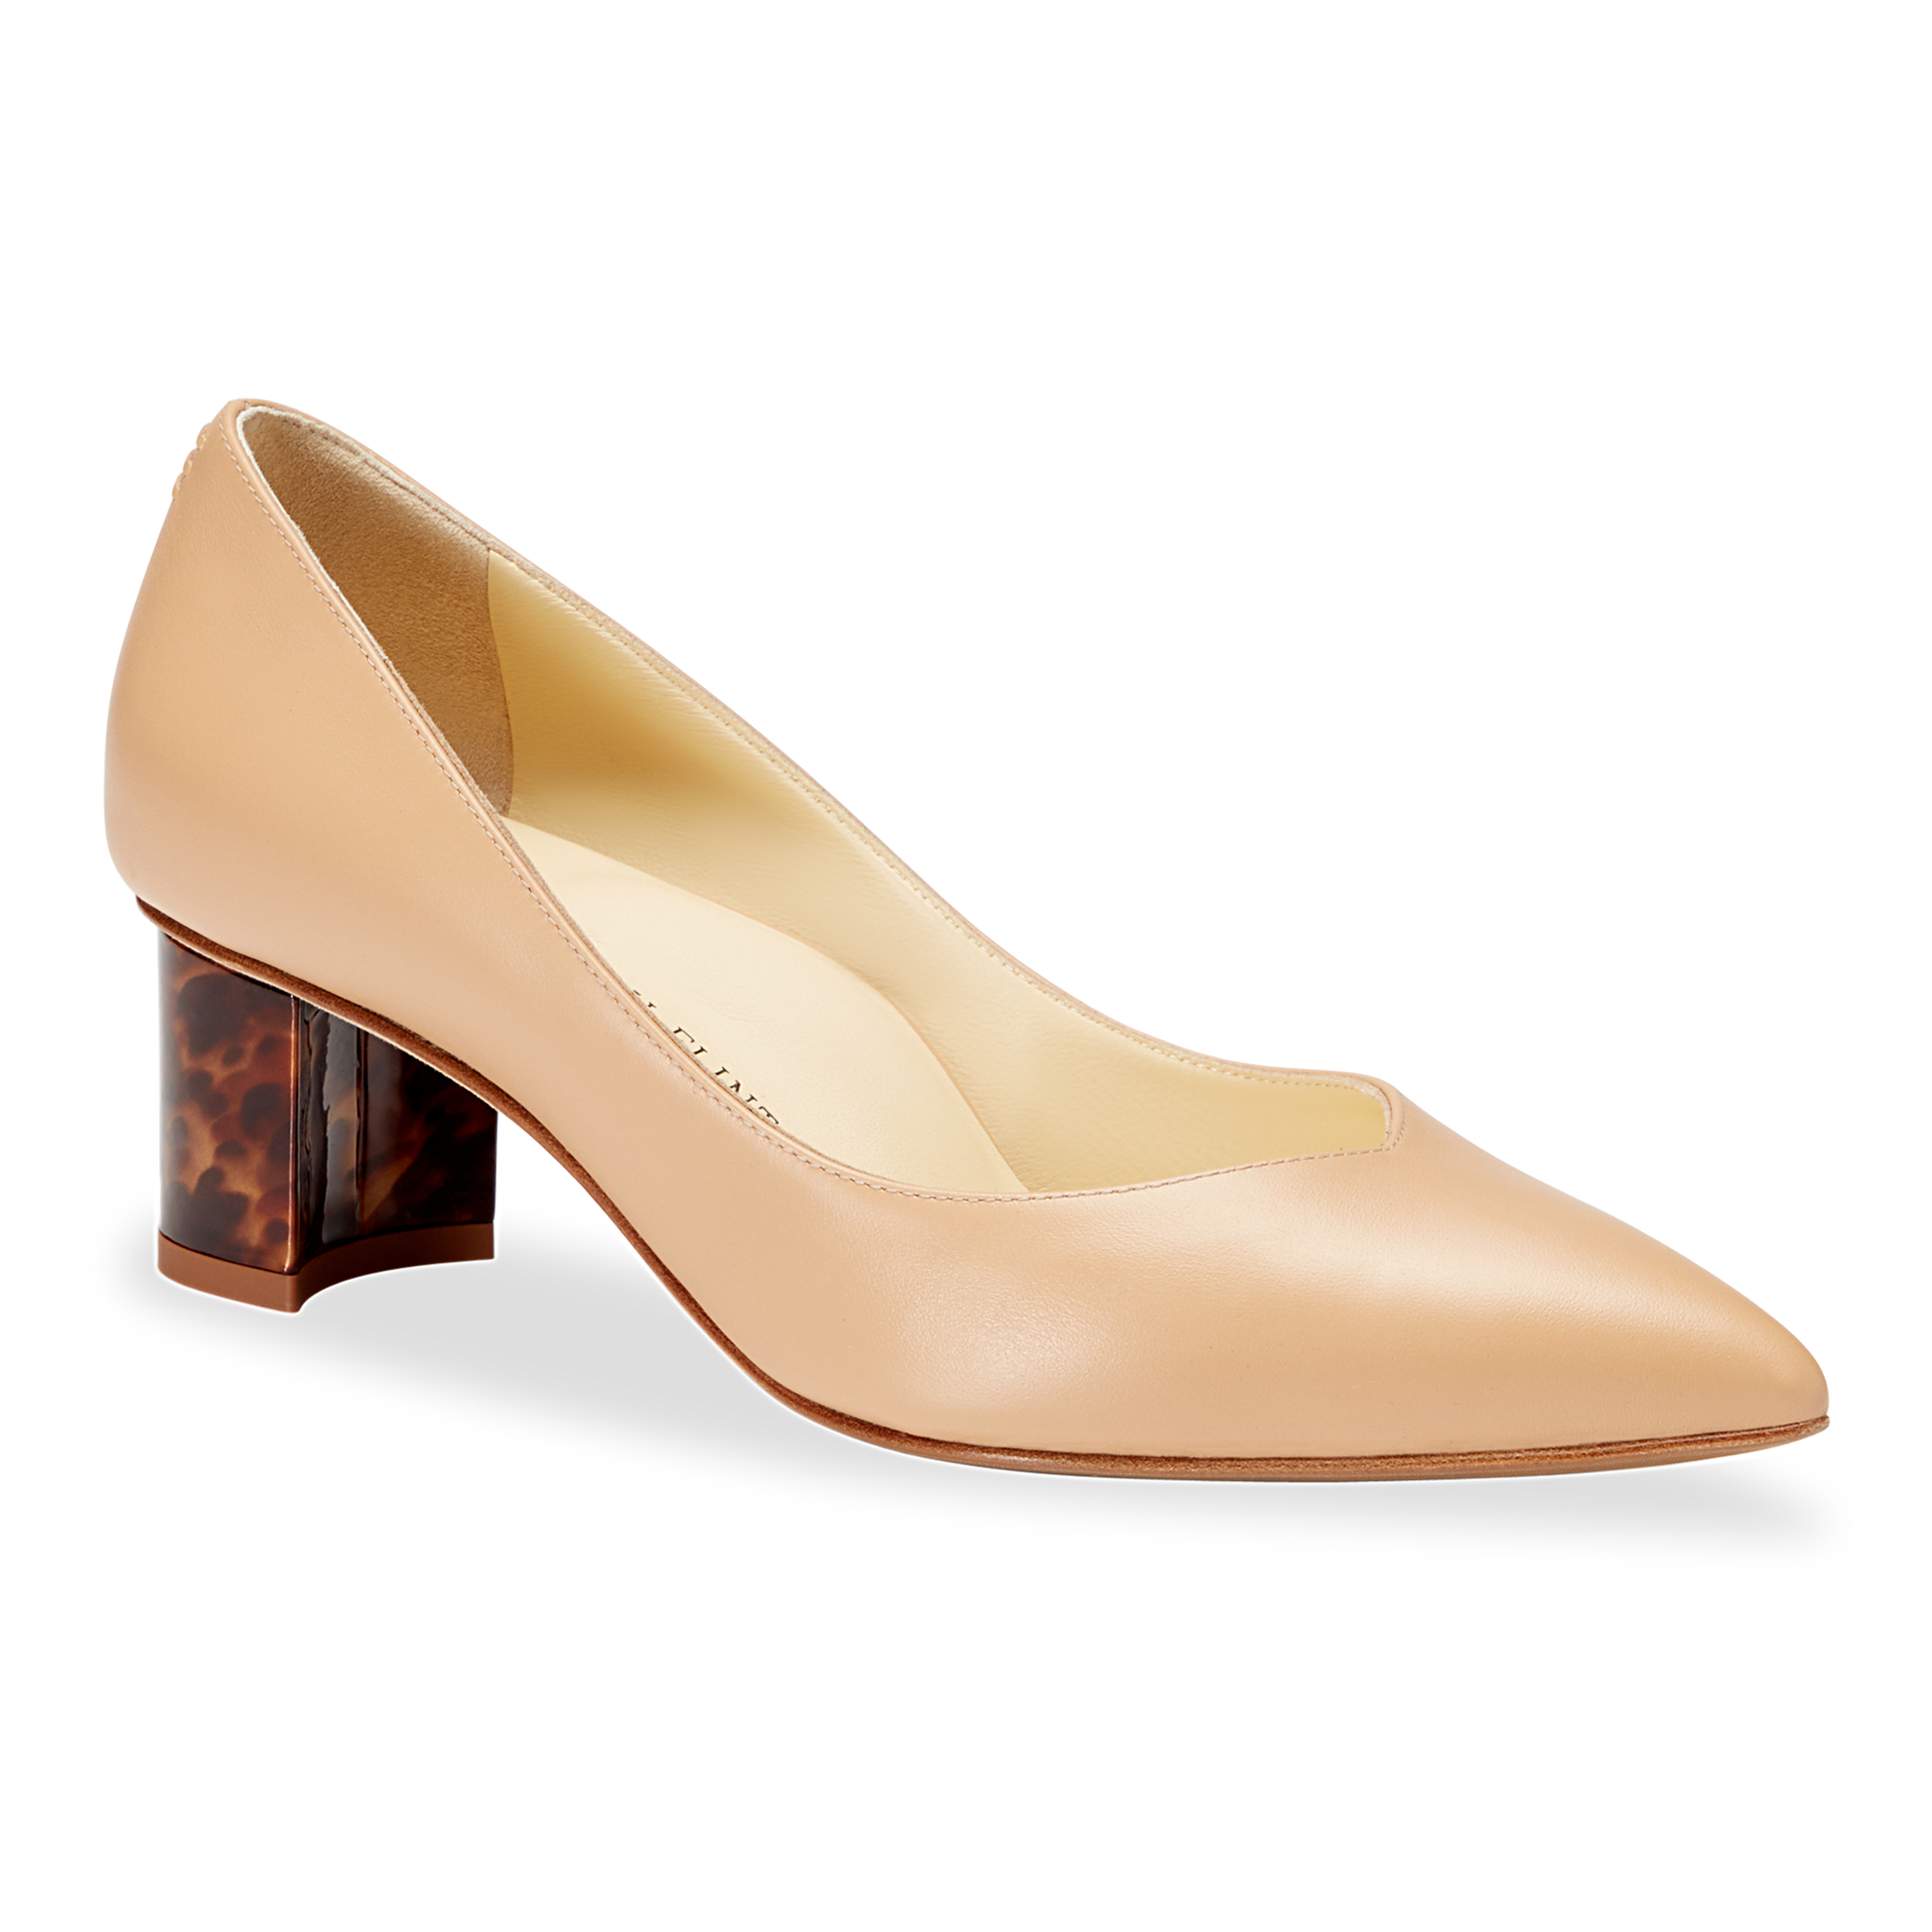 50mm Italian Made Pointed Toe Perfect Emma Pump in Sand Calf